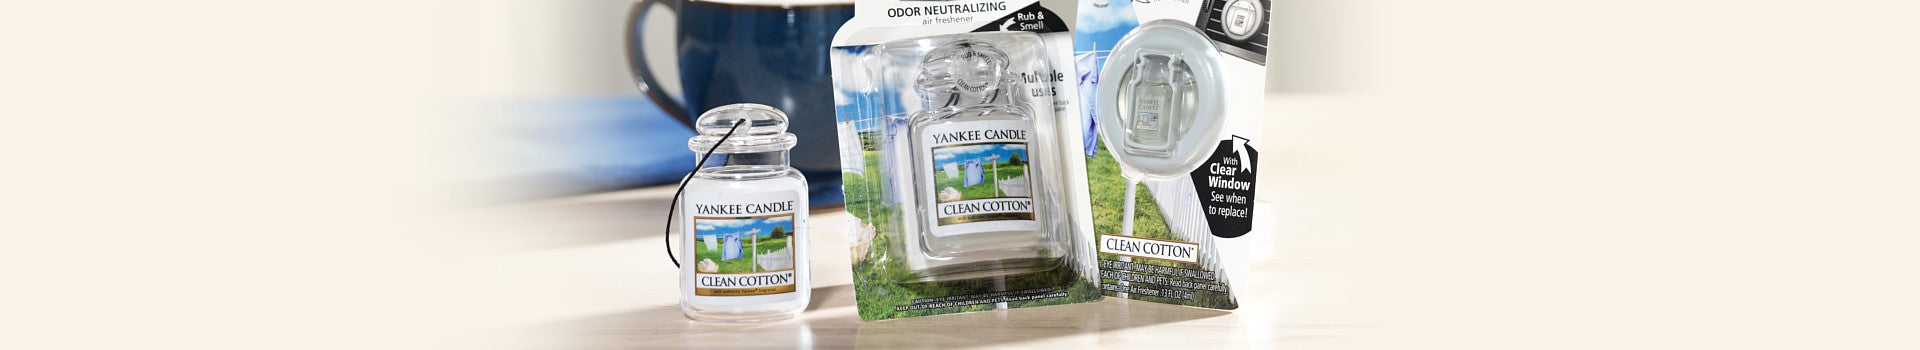 Yankee Candle Vent Sticks & Clips